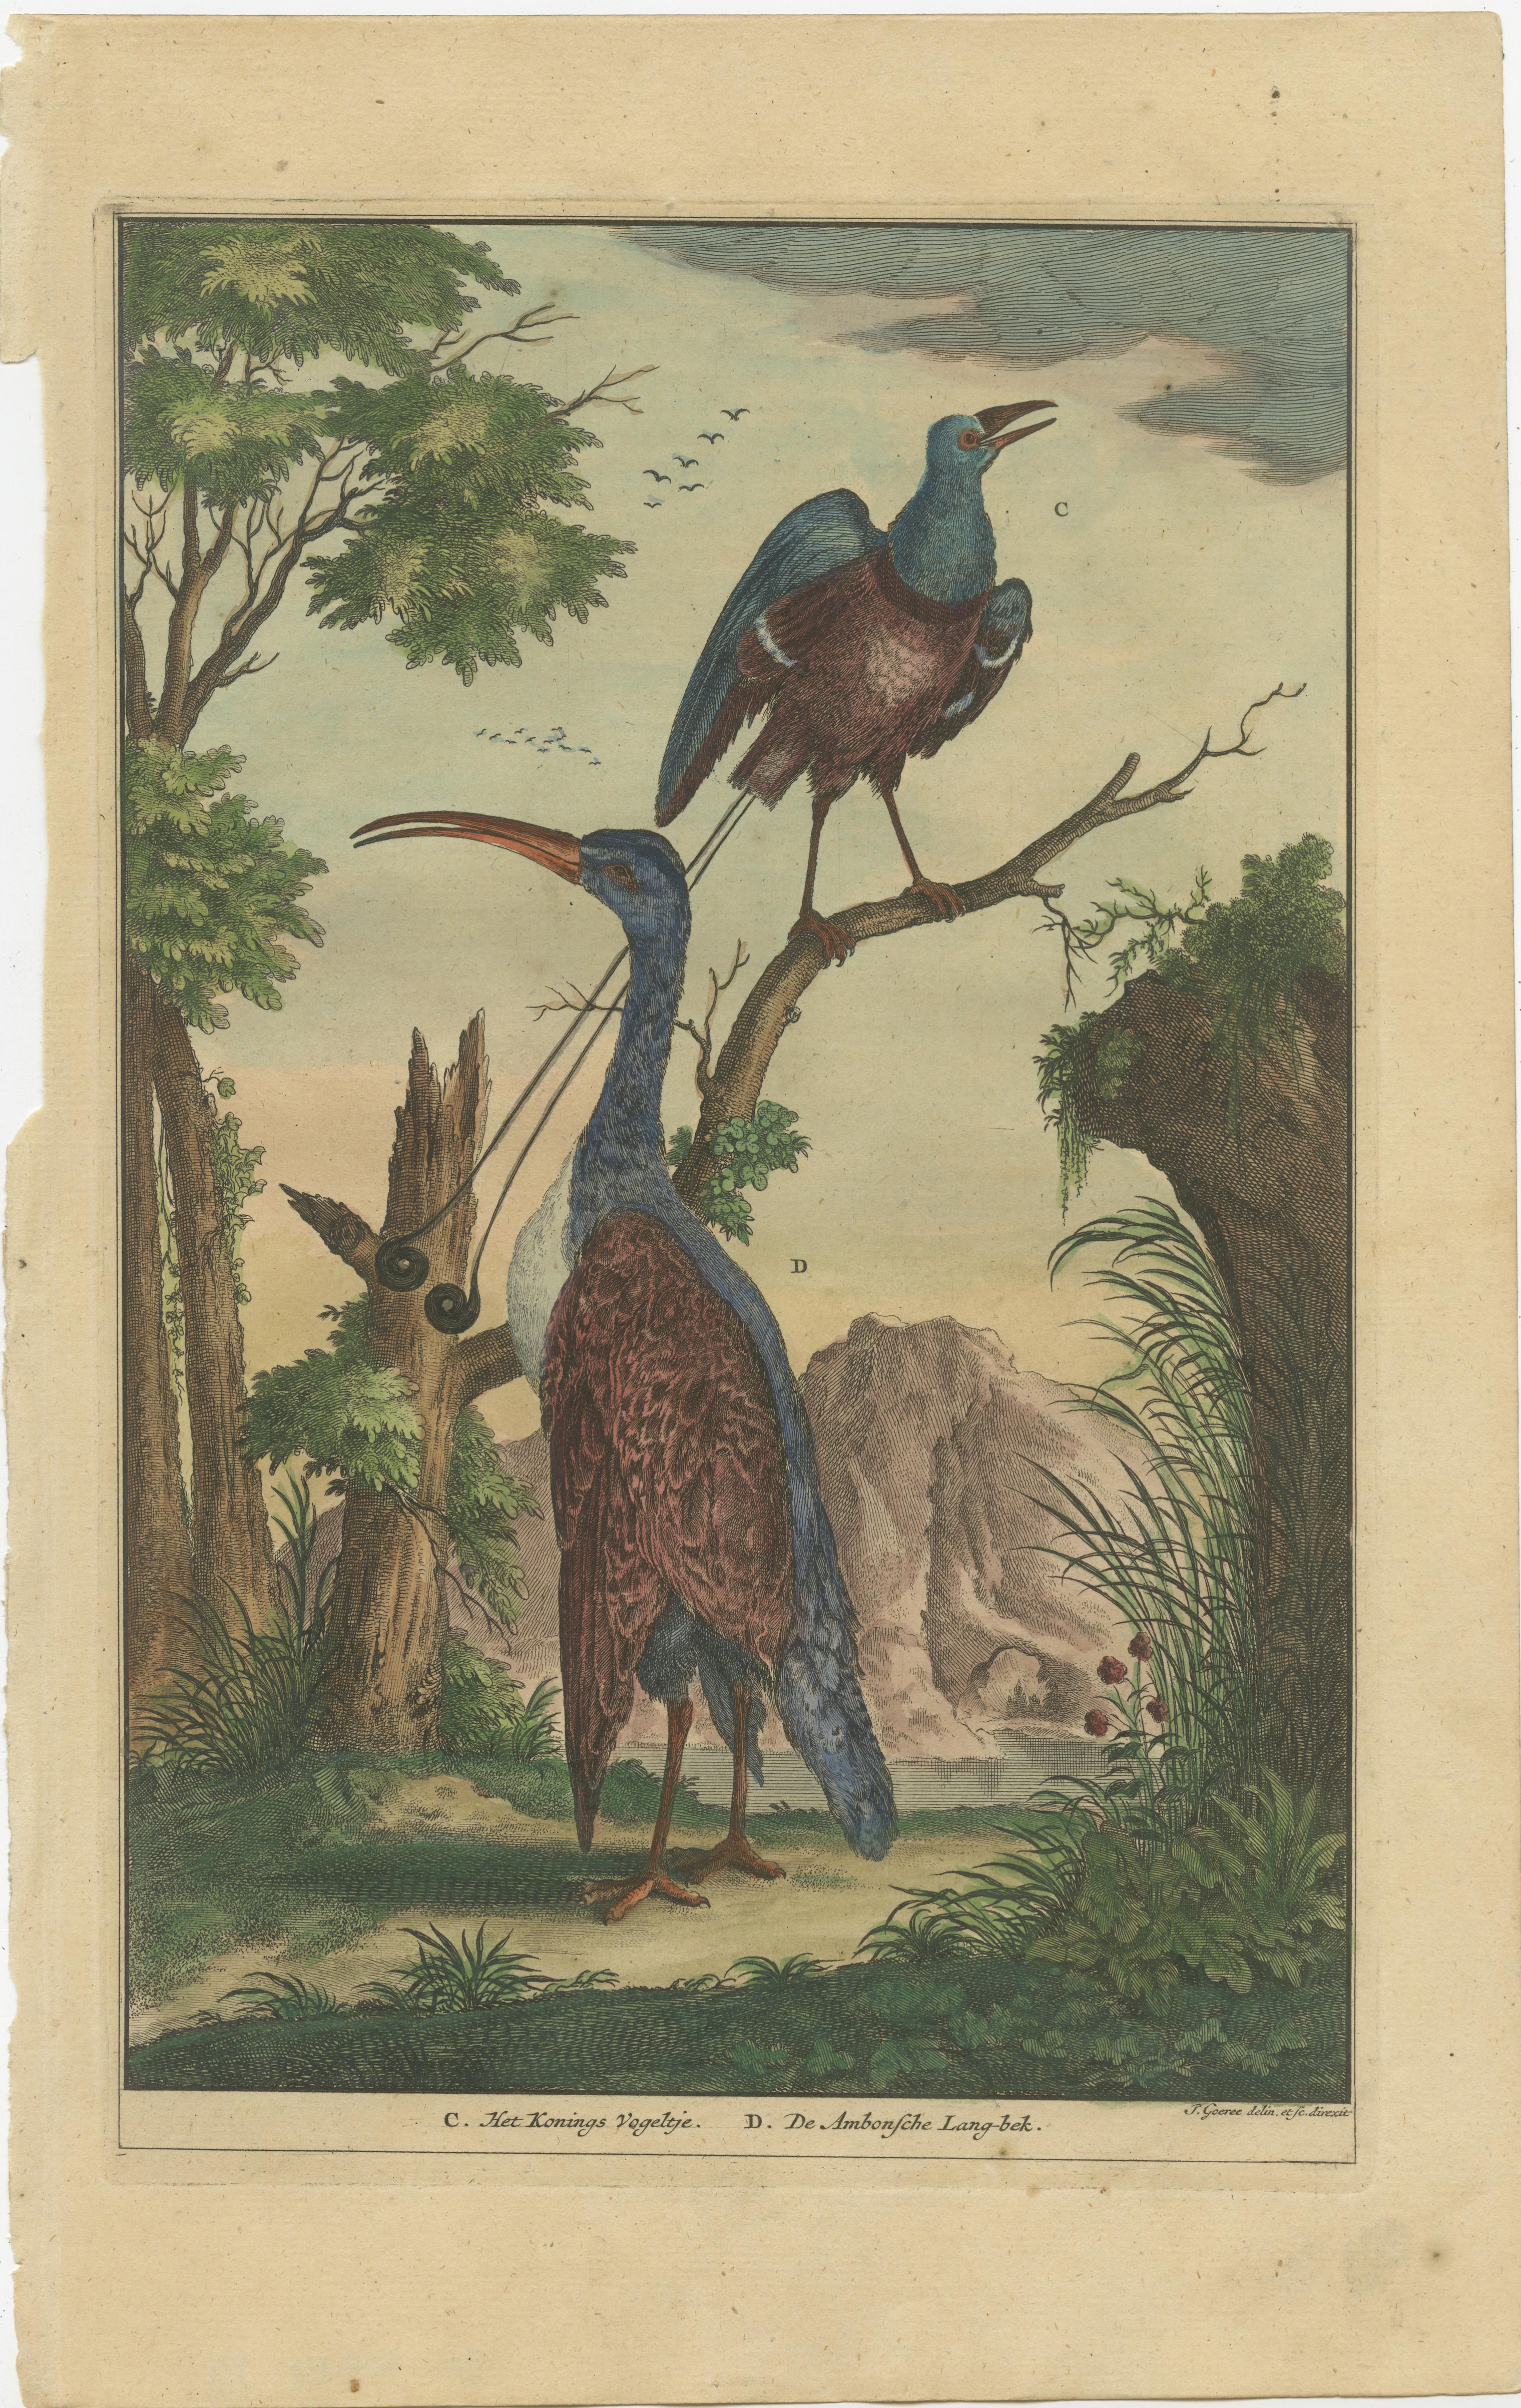 Antique print titled 'C. Het Konings Vogeltje (..)'. This print depicts a bird of paradise and another bird species, native to Ambon/Indonesia. This print originates from 'Oud en Nieuw Oost-Indiën' by F. Valentijn.

François Valentyn or Valentijn